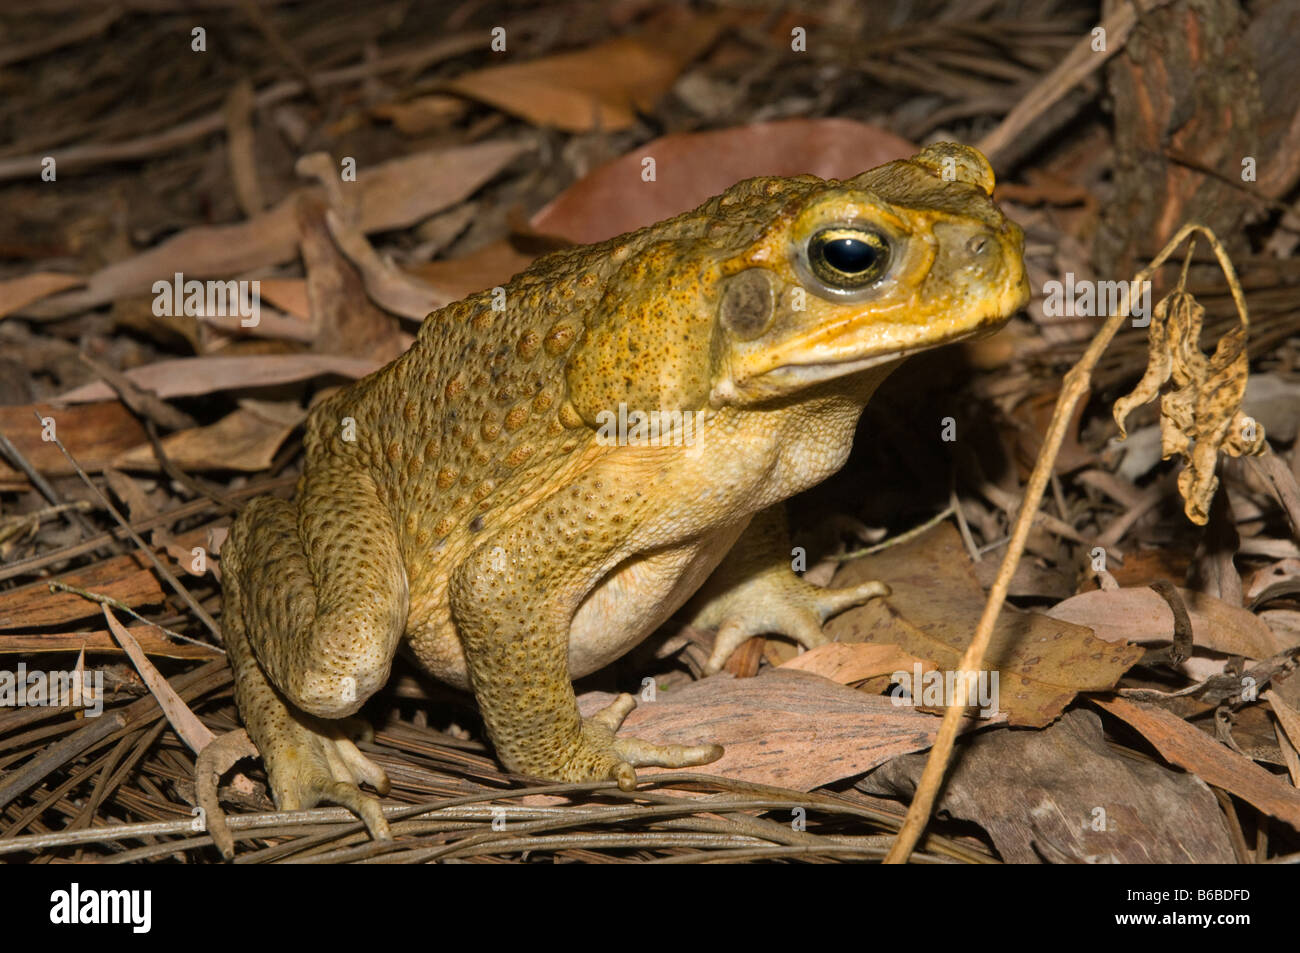 Cane Toad (Bufo marinus) adult introduced pest species Lichfield National Park northern Territory Australia October Stock Photo